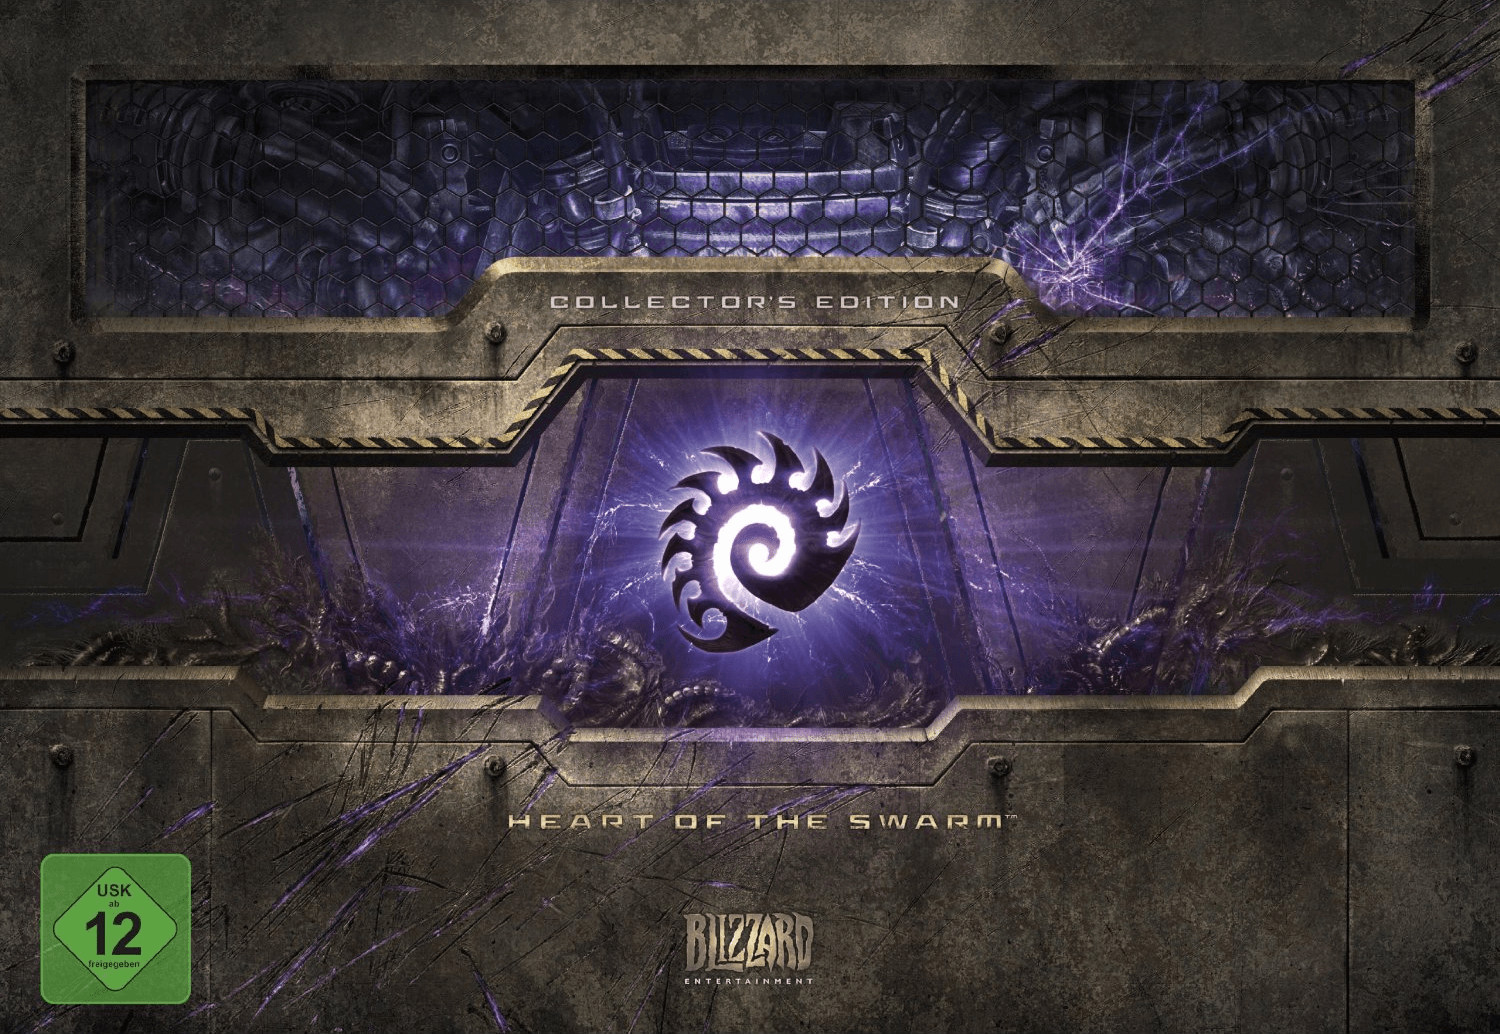 StarCraft II: Heart of the Swarm - Collector's Edition (PC/Mac)